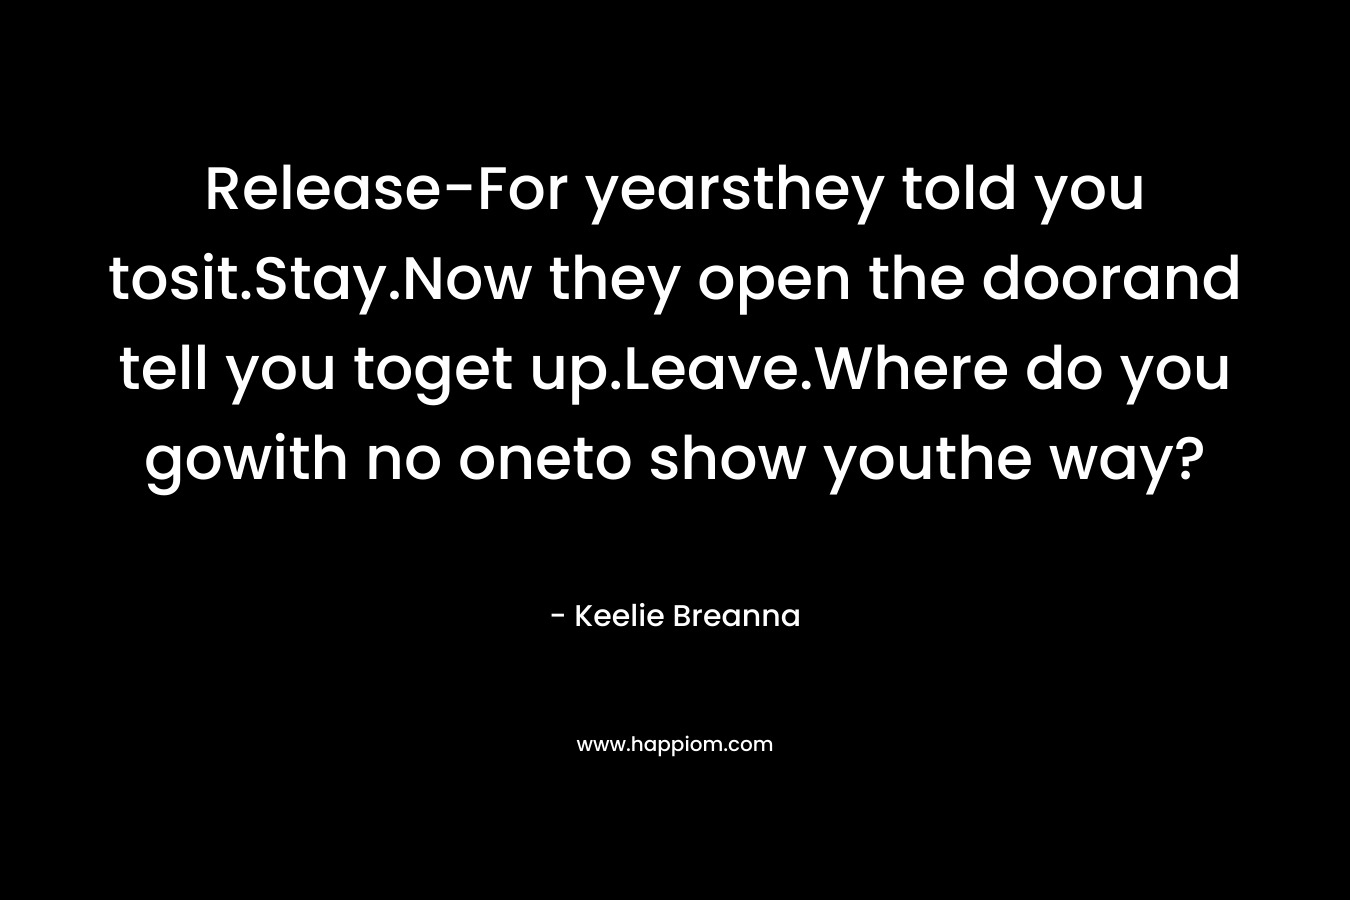 Release-For yearsthey told you tosit.Stay.Now they open the doorand tell you toget up.Leave.Where do you gowith no oneto show youthe way? – Keelie Breanna